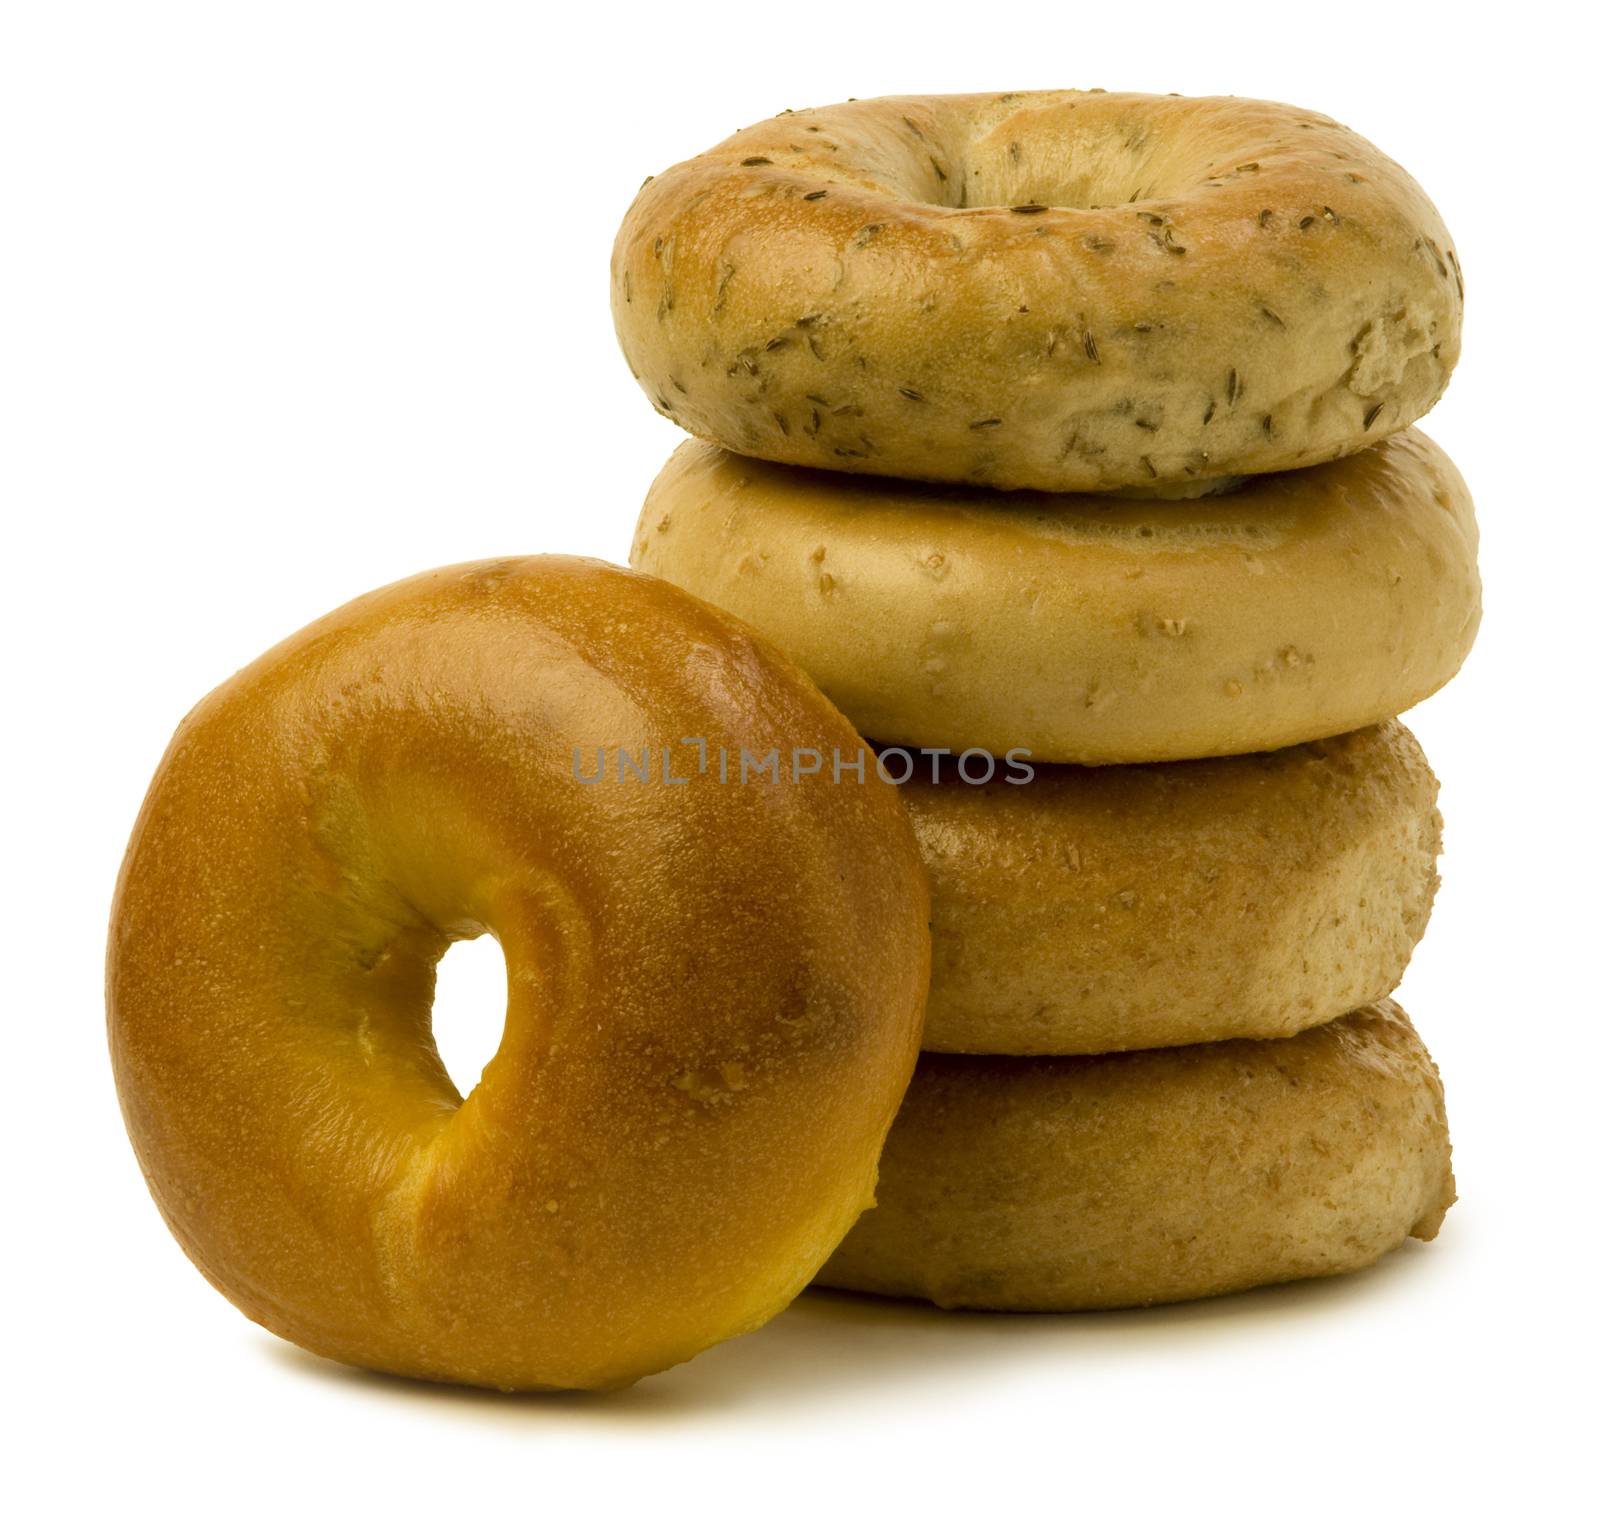 Stack of Four Bagels with OneLeaning on the Side by Balefire9